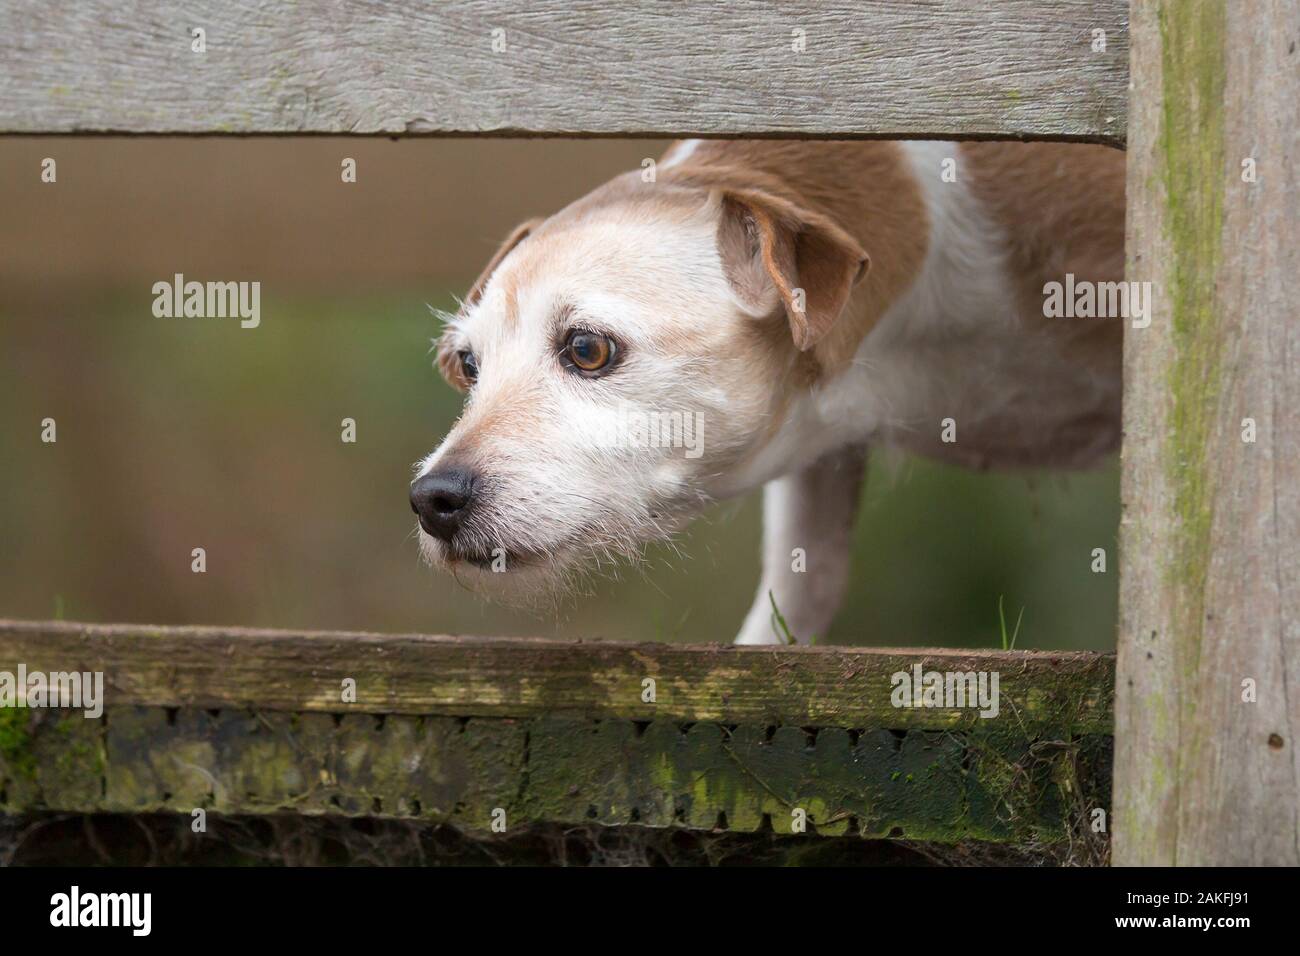 Kidderminster, UK. 9th January, 2019. UK weather: on another day of constant rain showers in Worcestershire, this terrier dog is peering through the wooden rails of a country footbridge, checking the rising water levels of the brook below, contemplating either a paddle or a swim! Front view close up of excited pet dog on winter walk. Credit: Lee Hudson Stock Photo